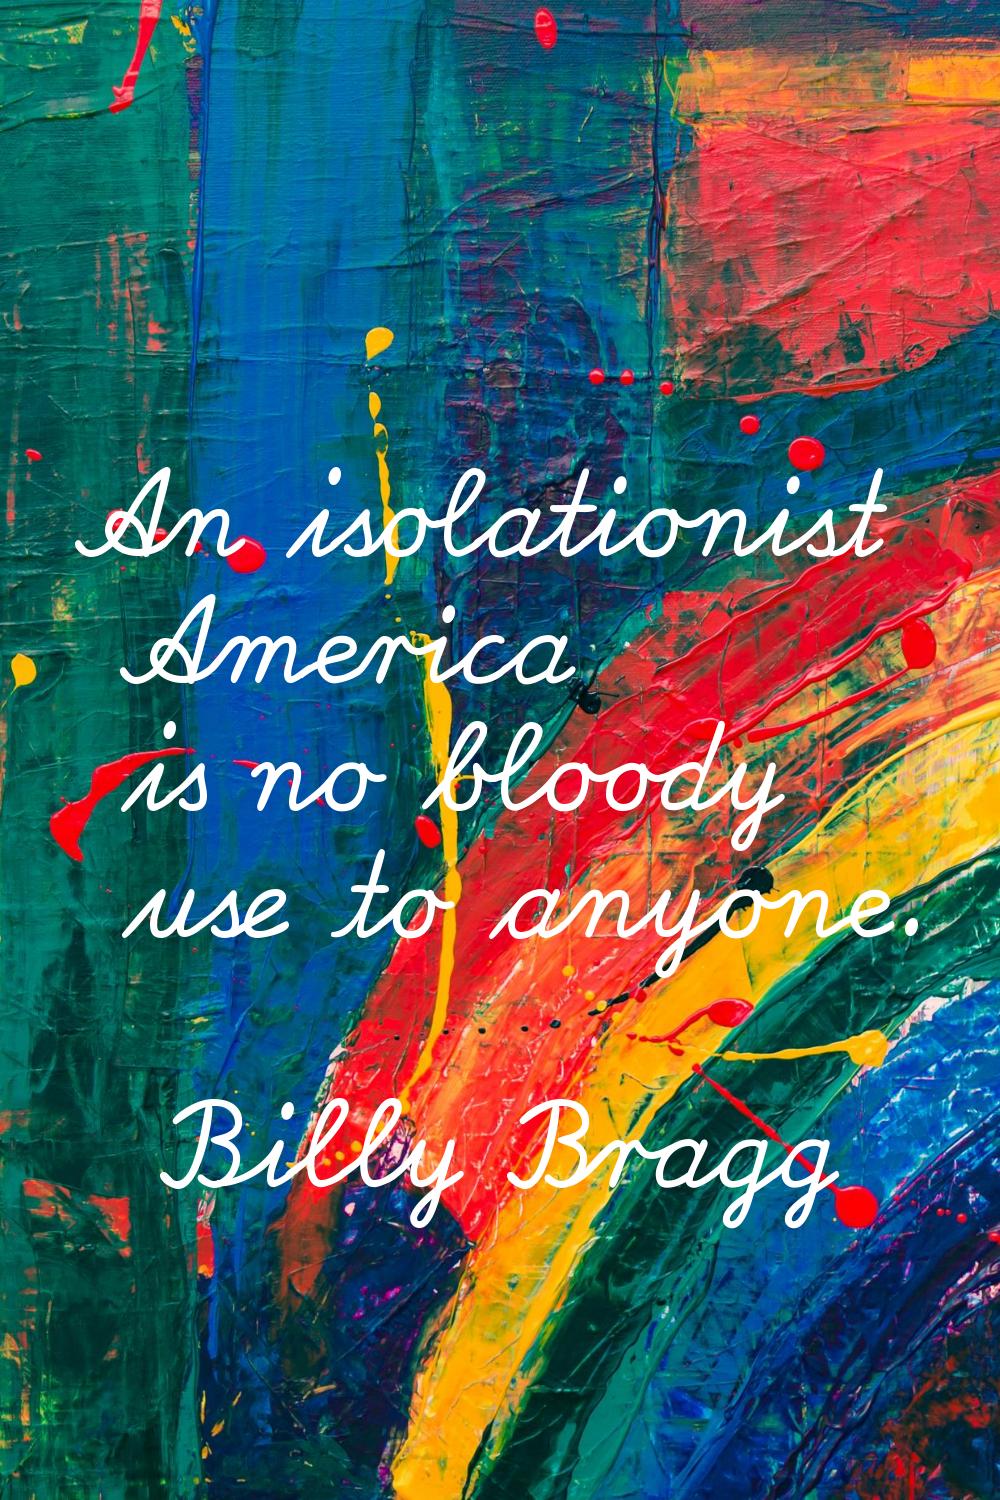 An isolationist America is no bloody use to anyone.